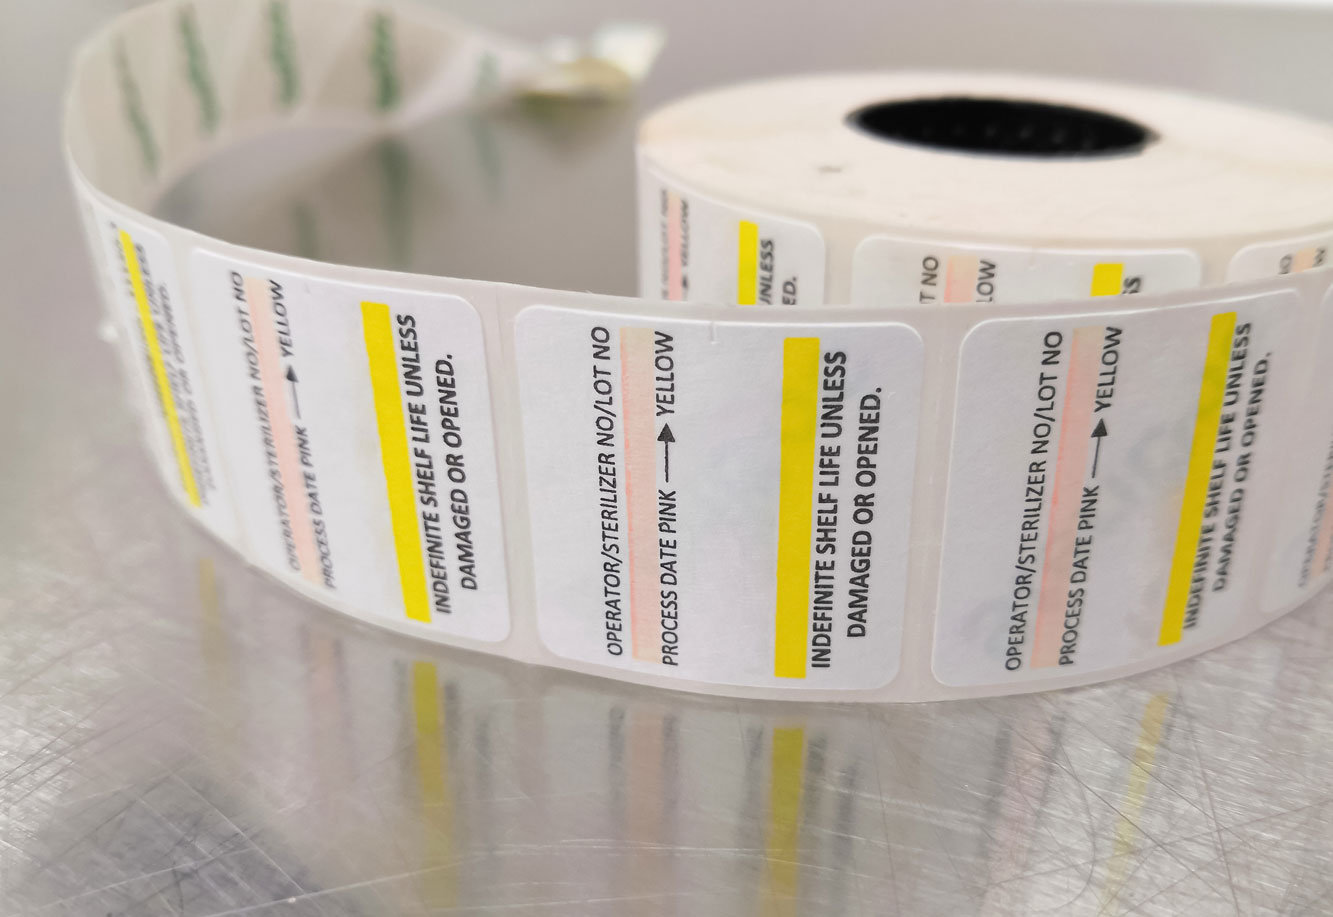 Labels on the Roll Printing Ruislip